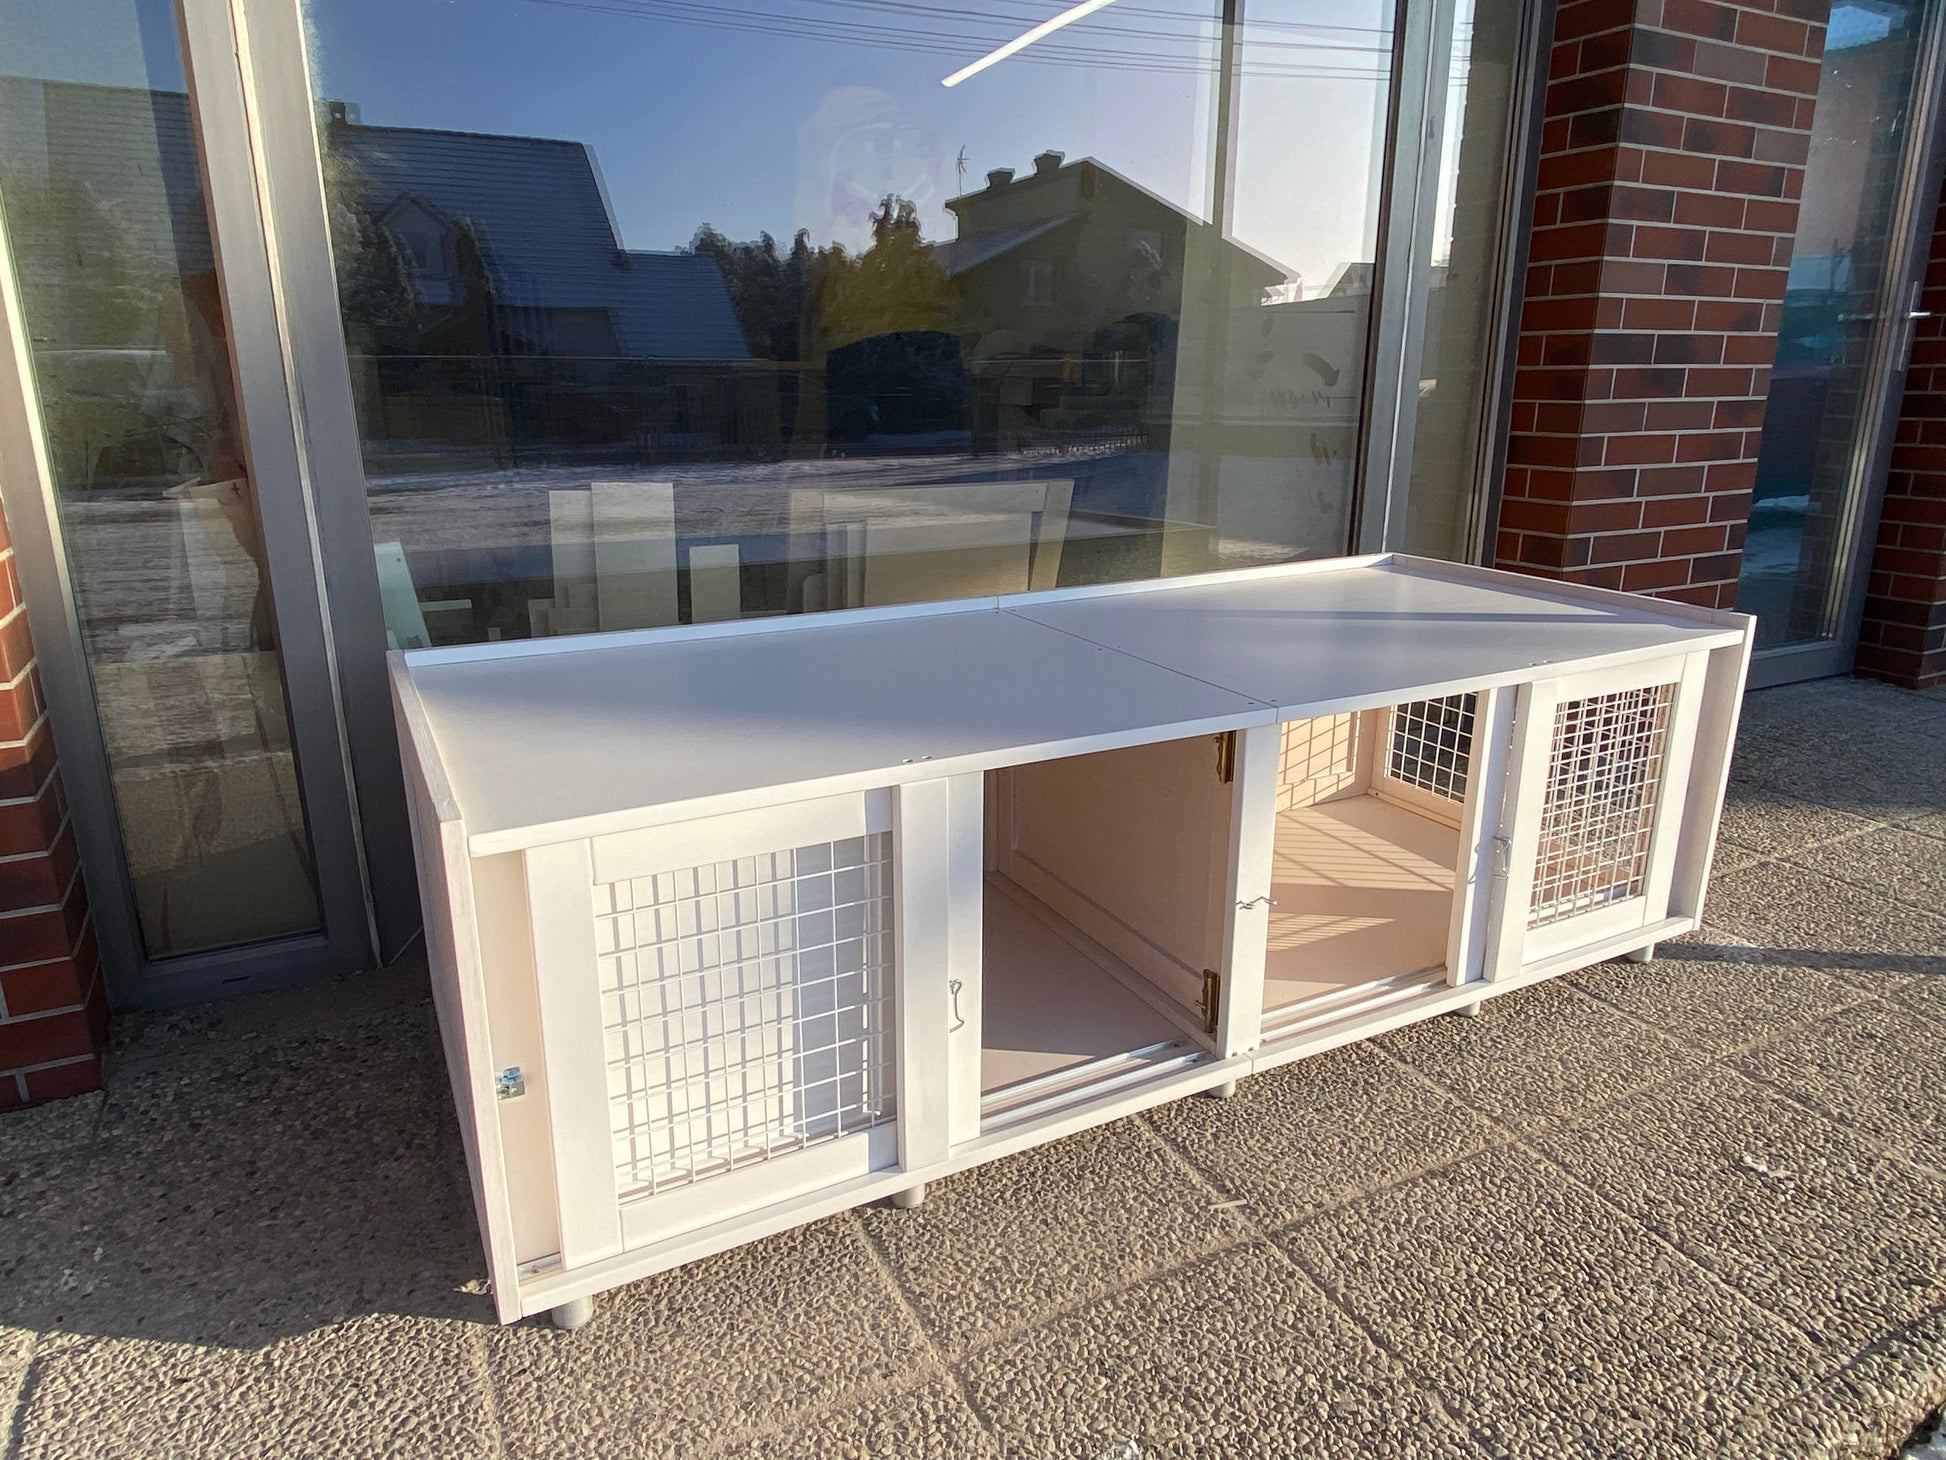 Furniture for rabbits and bunnies, house cage for domestic rabbits of small and large size - WoW WooD